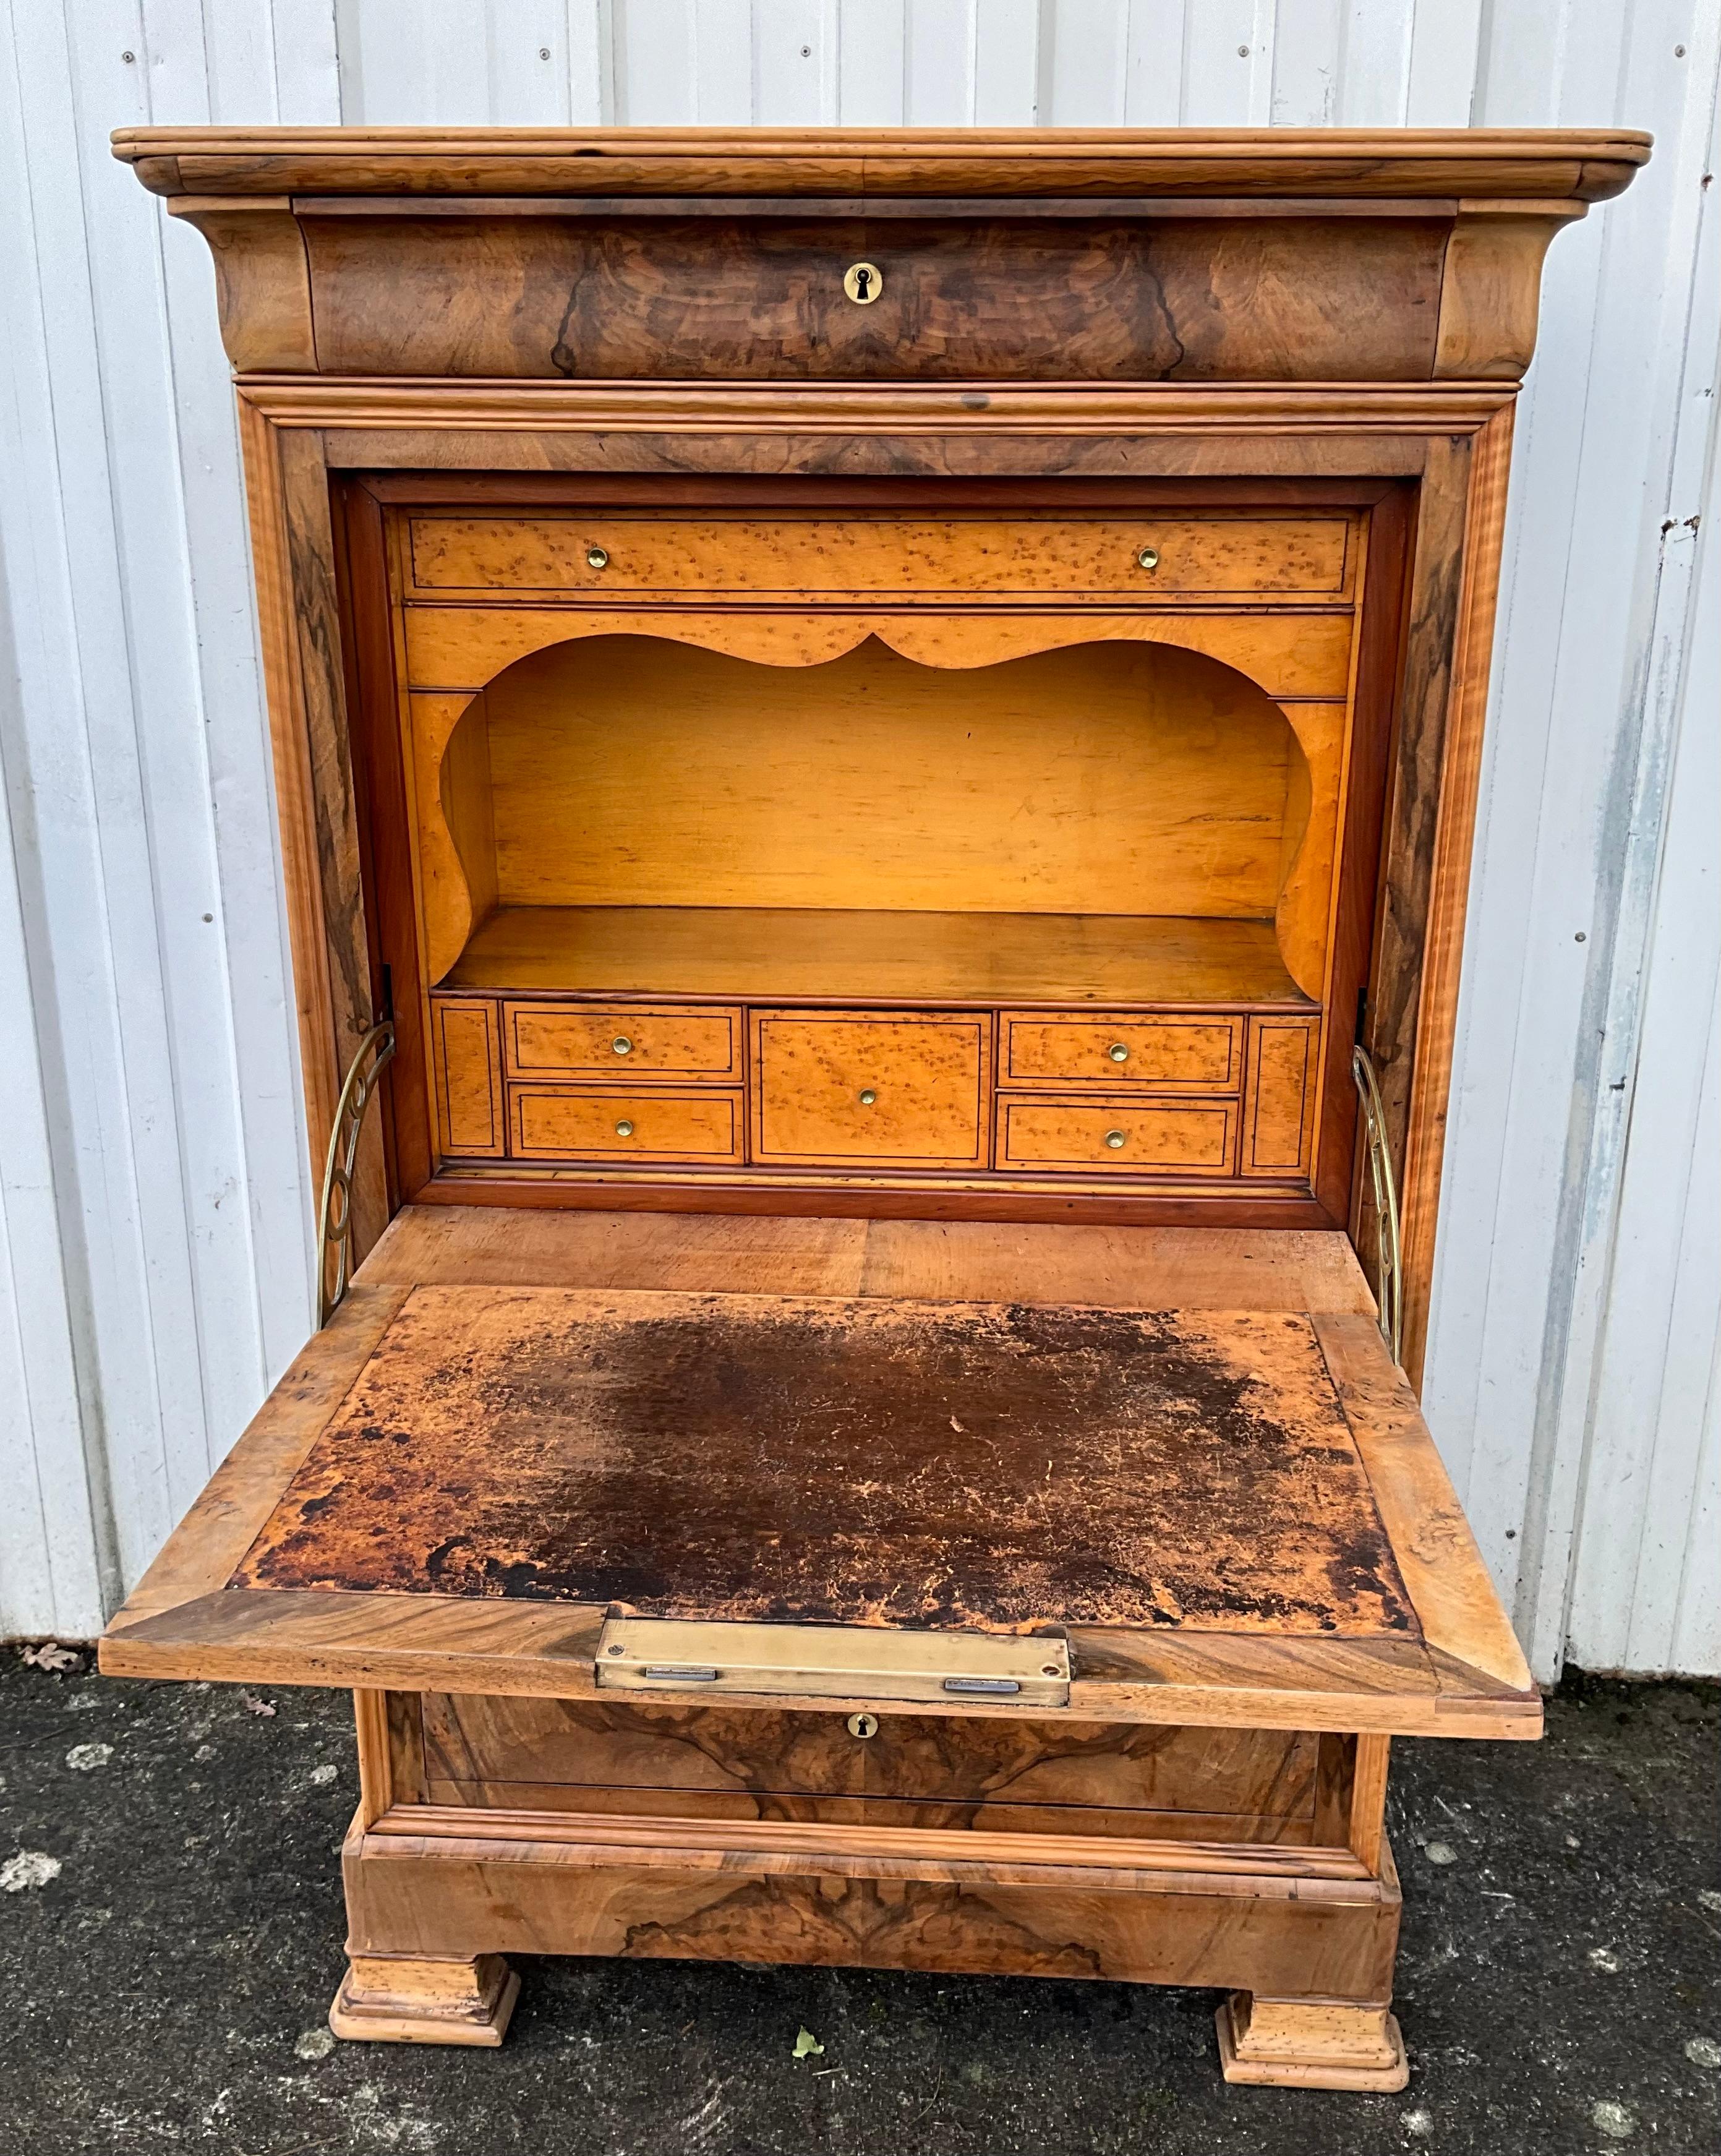 Secretary period Louis Philippe, mid 19th century, is in walnut bramble.

Walnut brambles are flamed because they have many aesthetic designs. These drawings have complex, highly contrasting patterns and intricate veins on a naturally dark